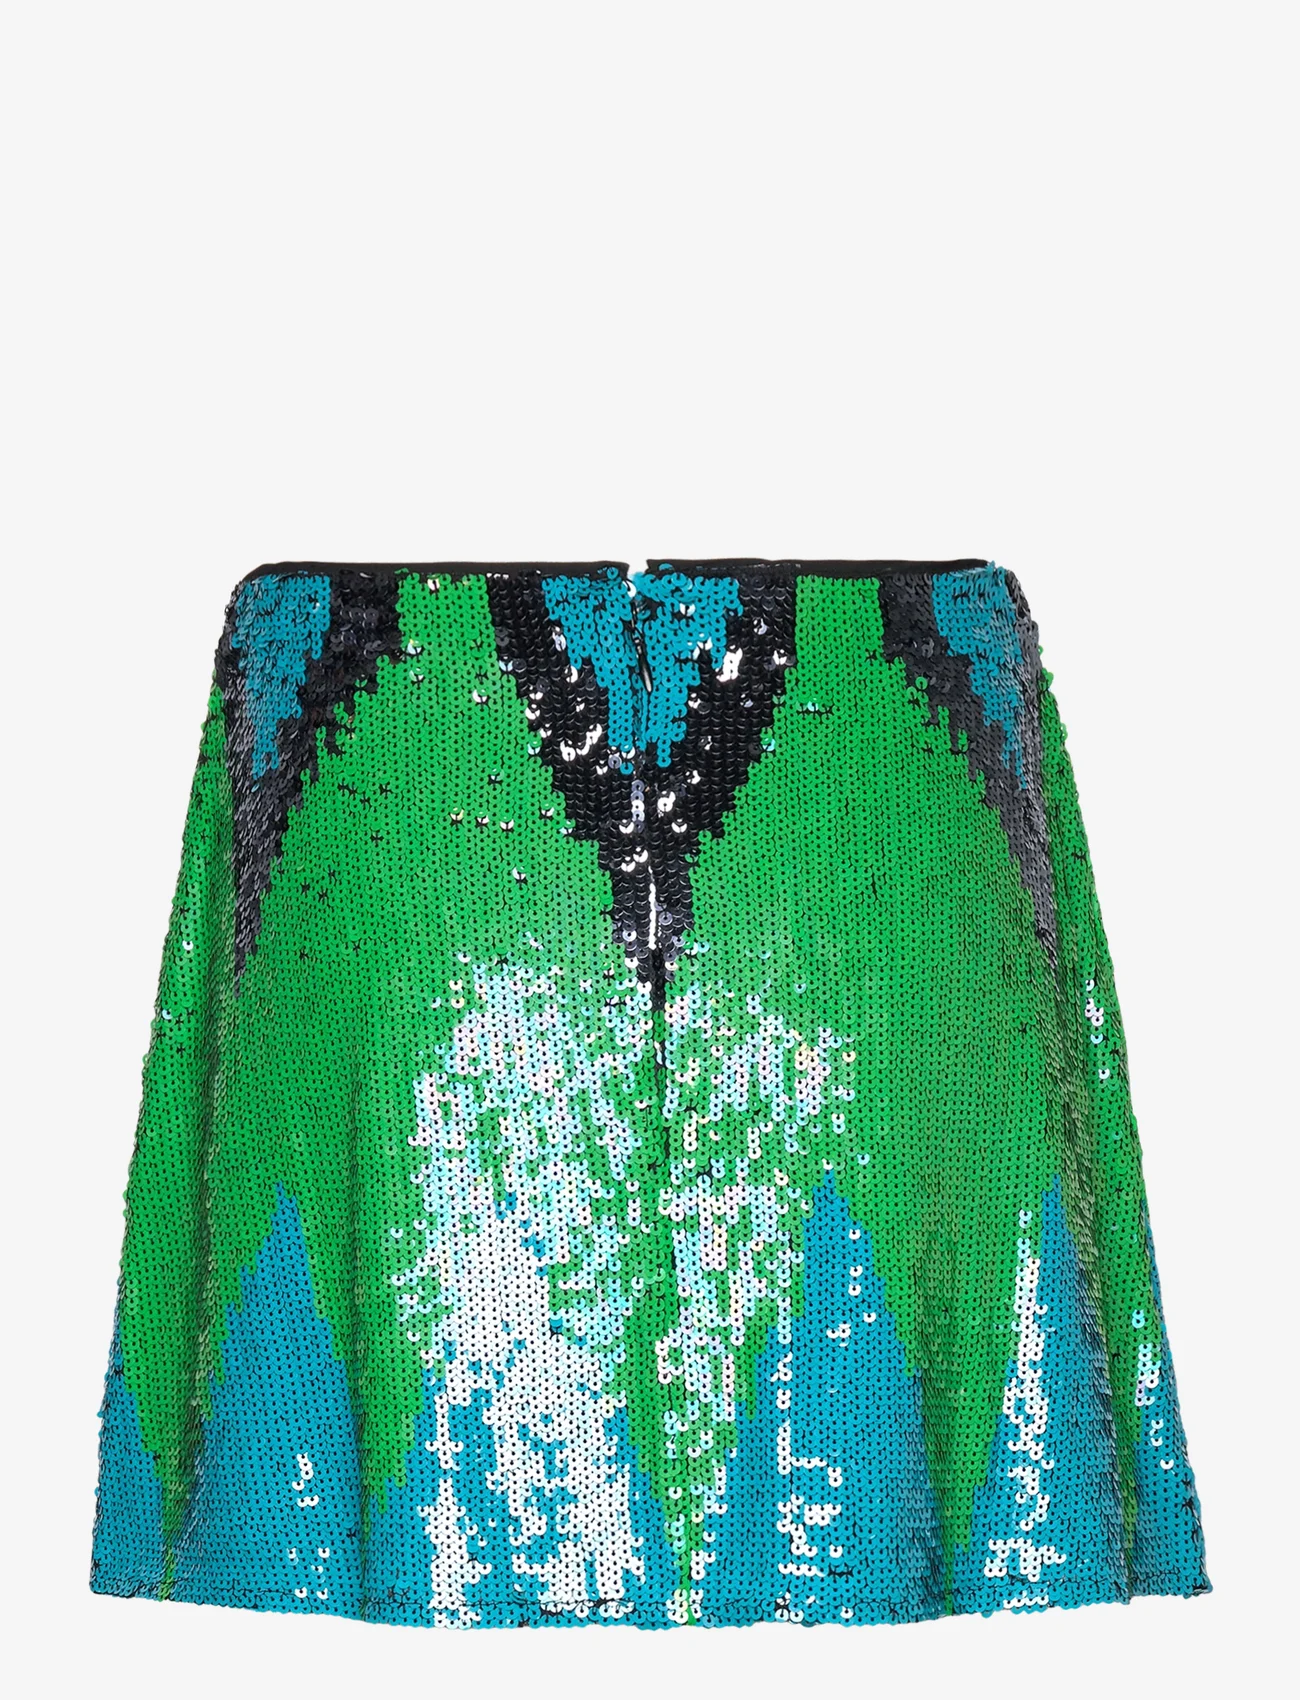 French Connection - EMIN EMBELLISHED SKIRT - trumpi sijonai - green mineral multi - 1